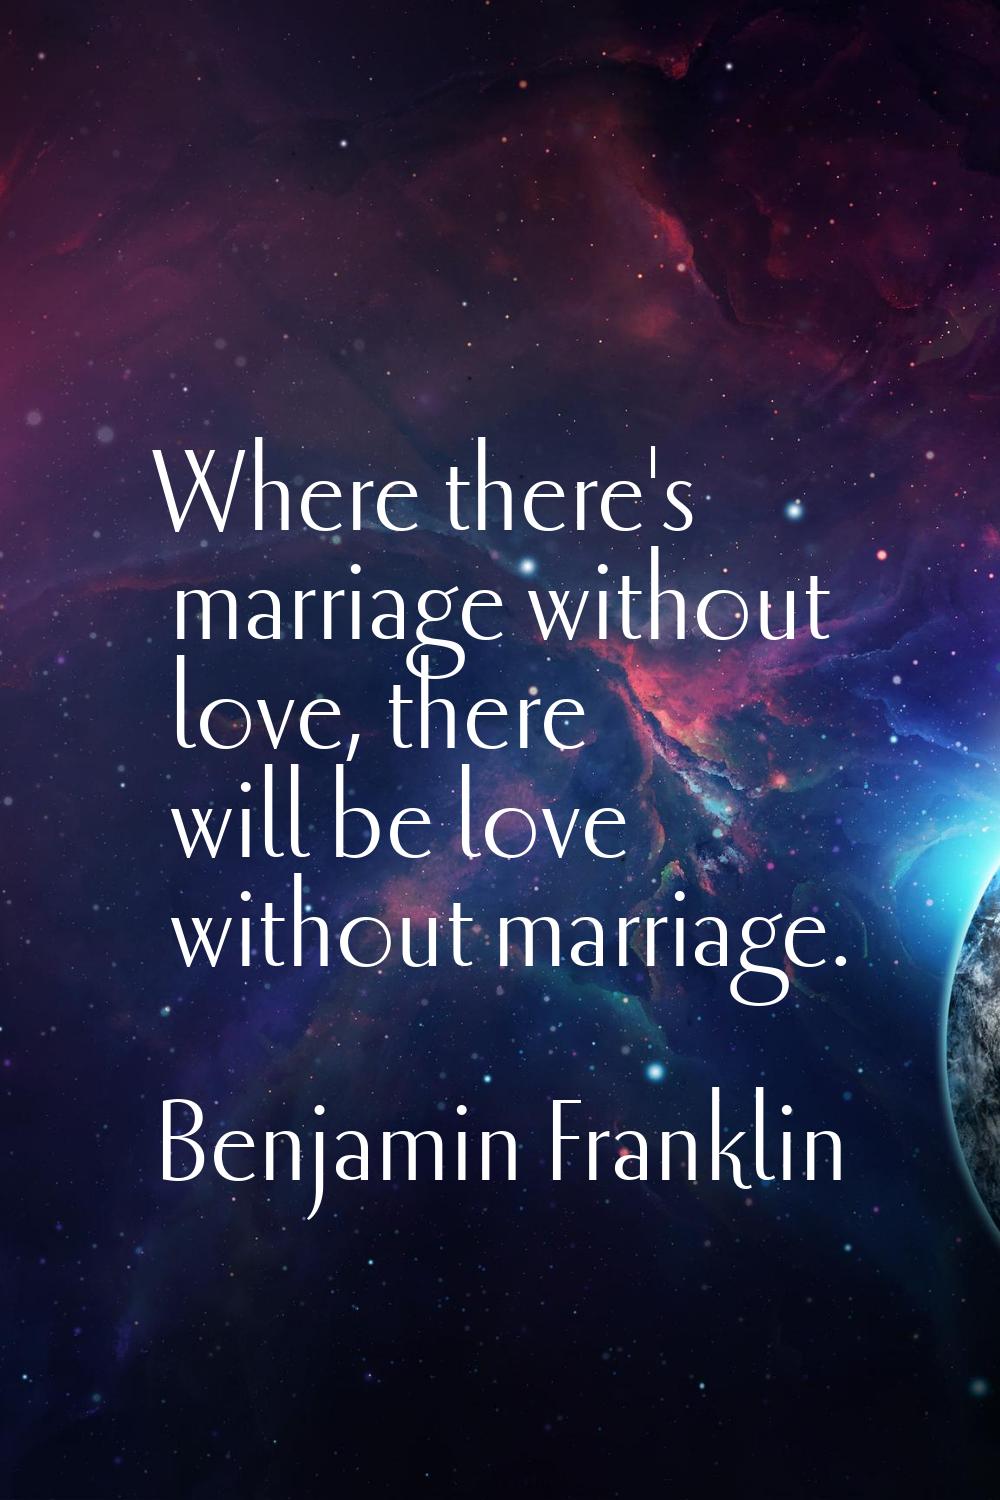 Where there's marriage without love, there will be love without marriage.